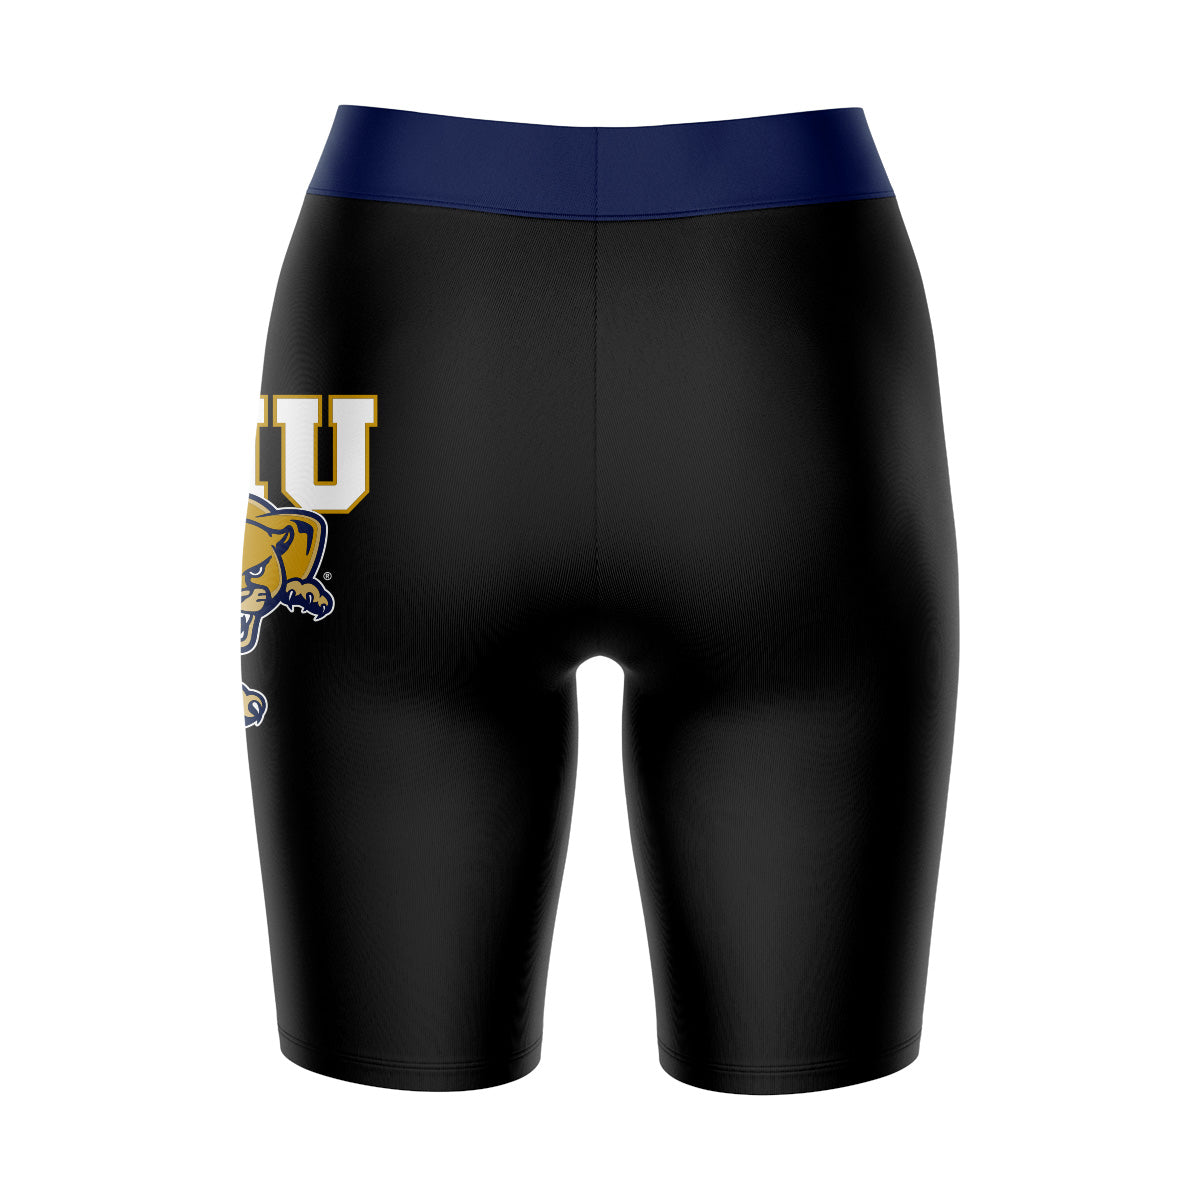 FIU Panthers Vive La Fete Game Day Logo on Thigh and Waistband Black and Navy Women Bike Short 9 Inseam"